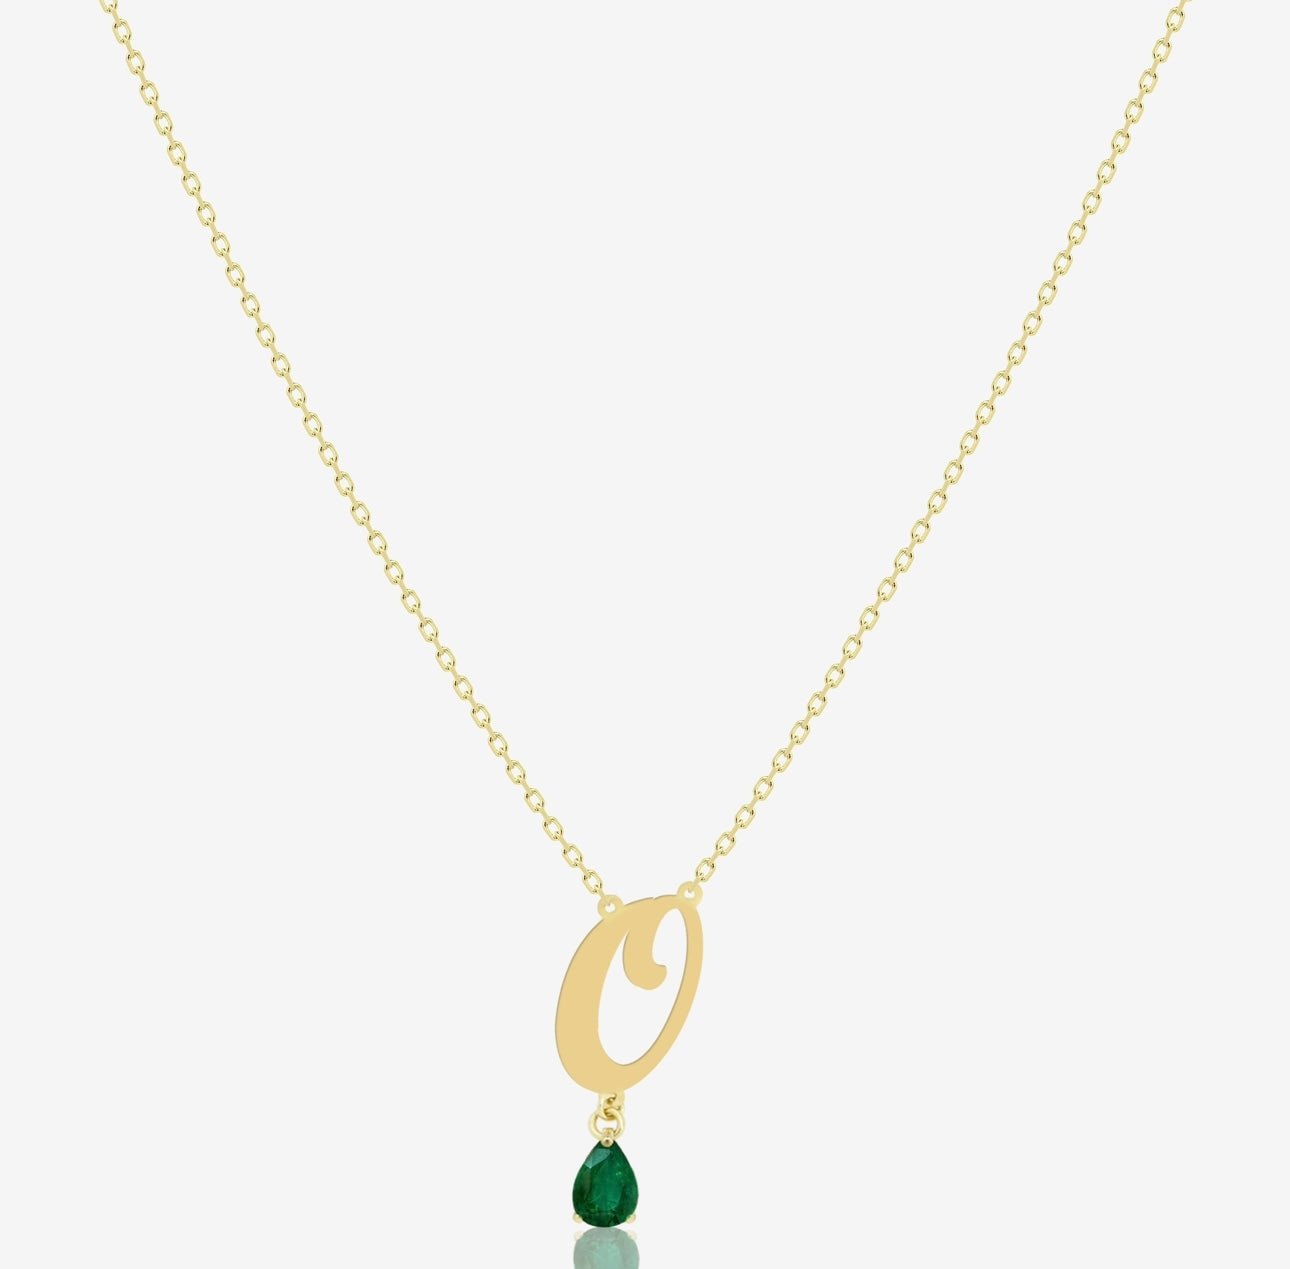 Initial Necklace in Emerald - 18k Gold - Ly